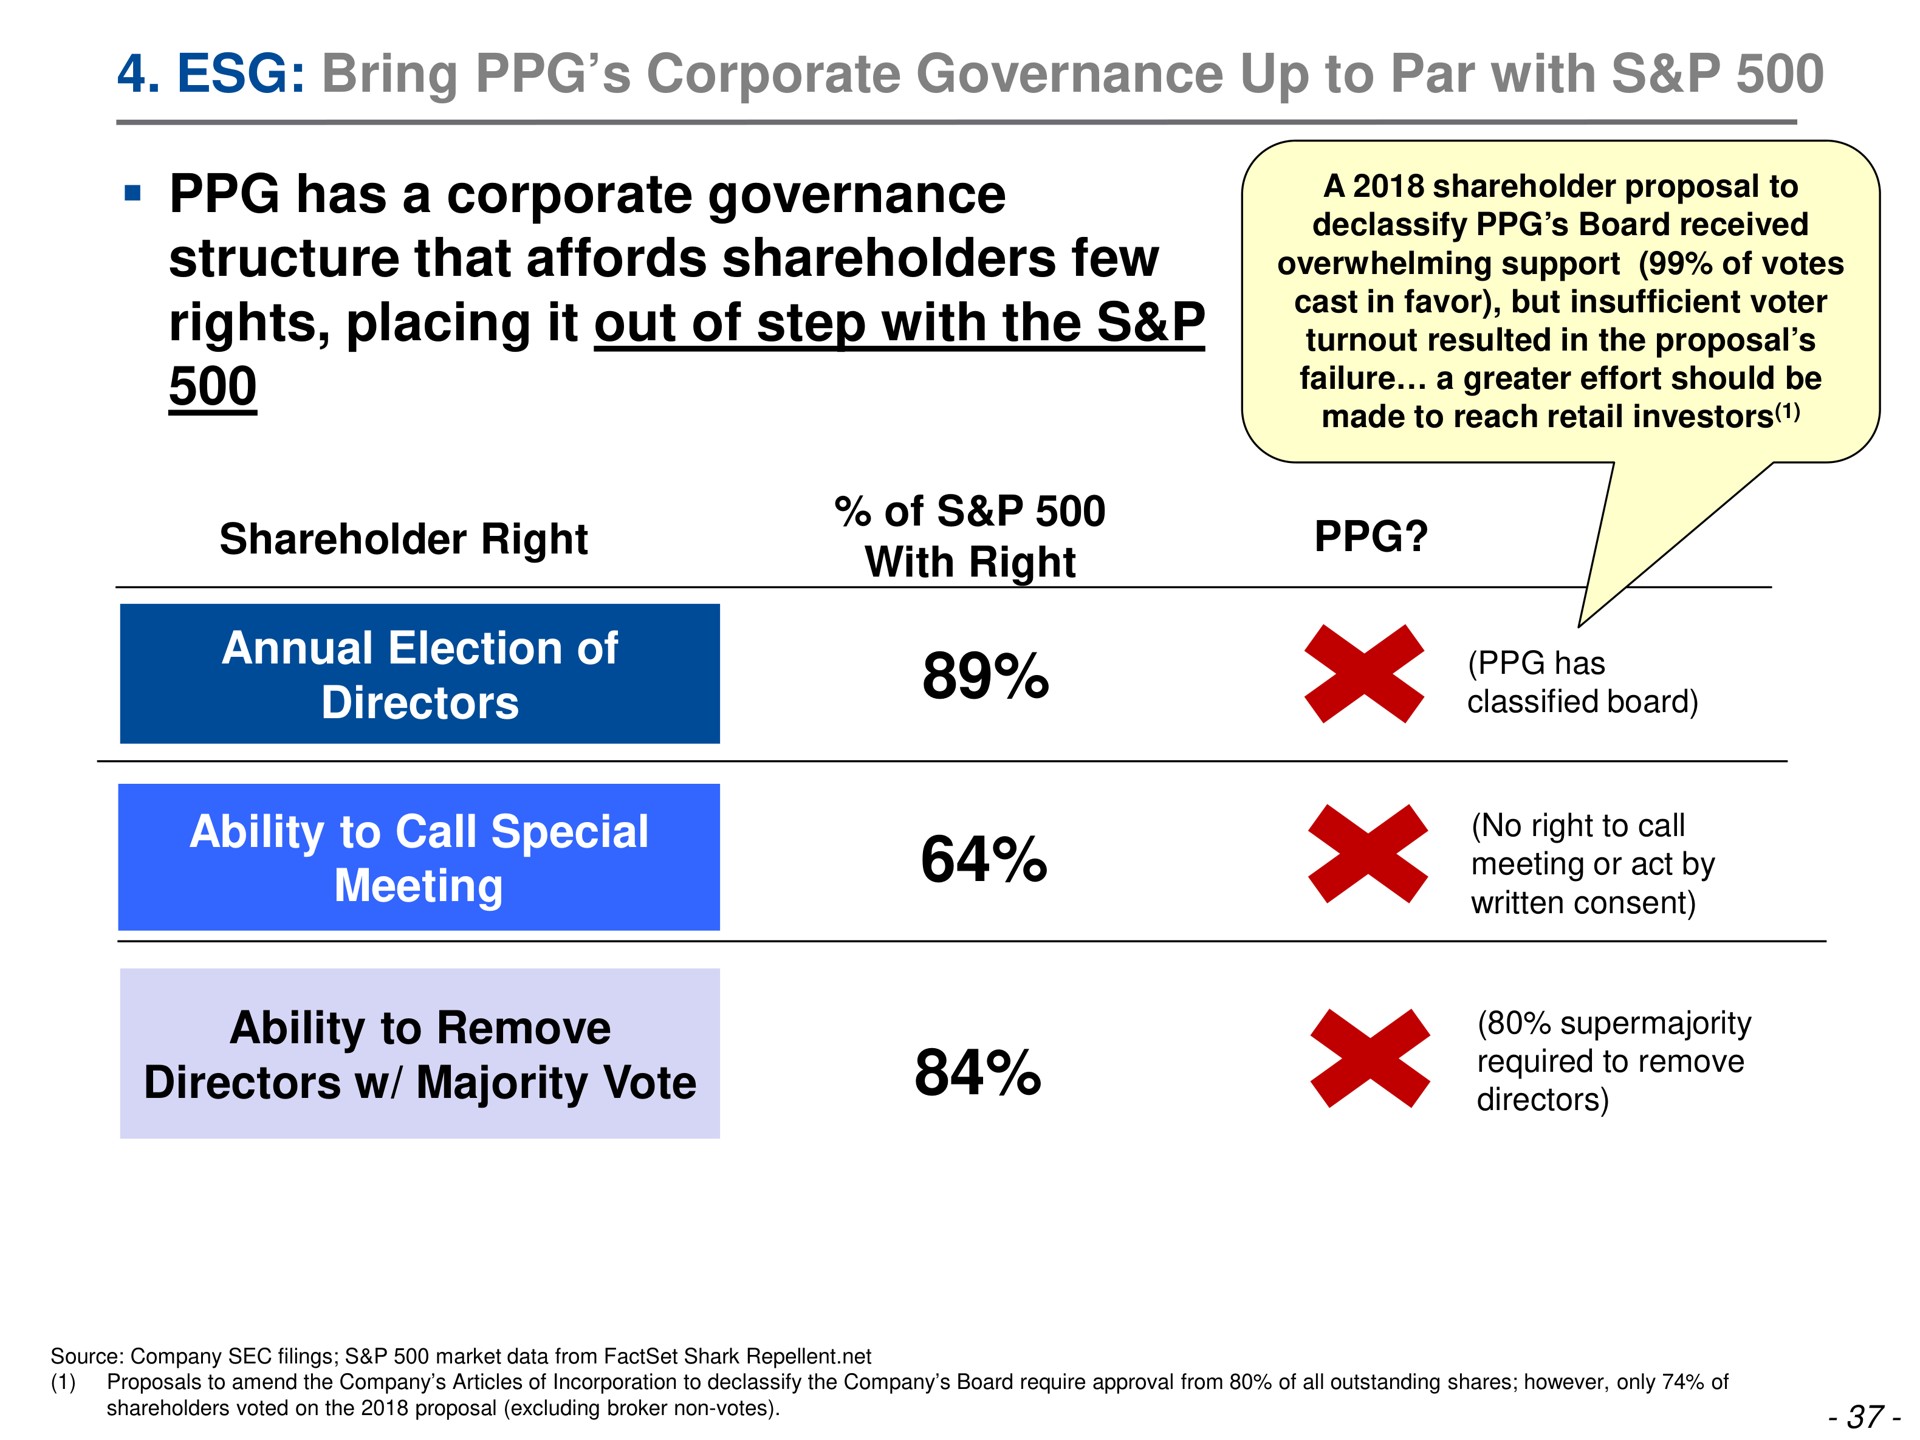 bring corporate governance up to par with has a corporate governance structure that affords shareholders few rights placing it out of step with the shareholder right annual election of directors ability to call special meeting ability to remove directors majority vote of with right no | Trian Partners